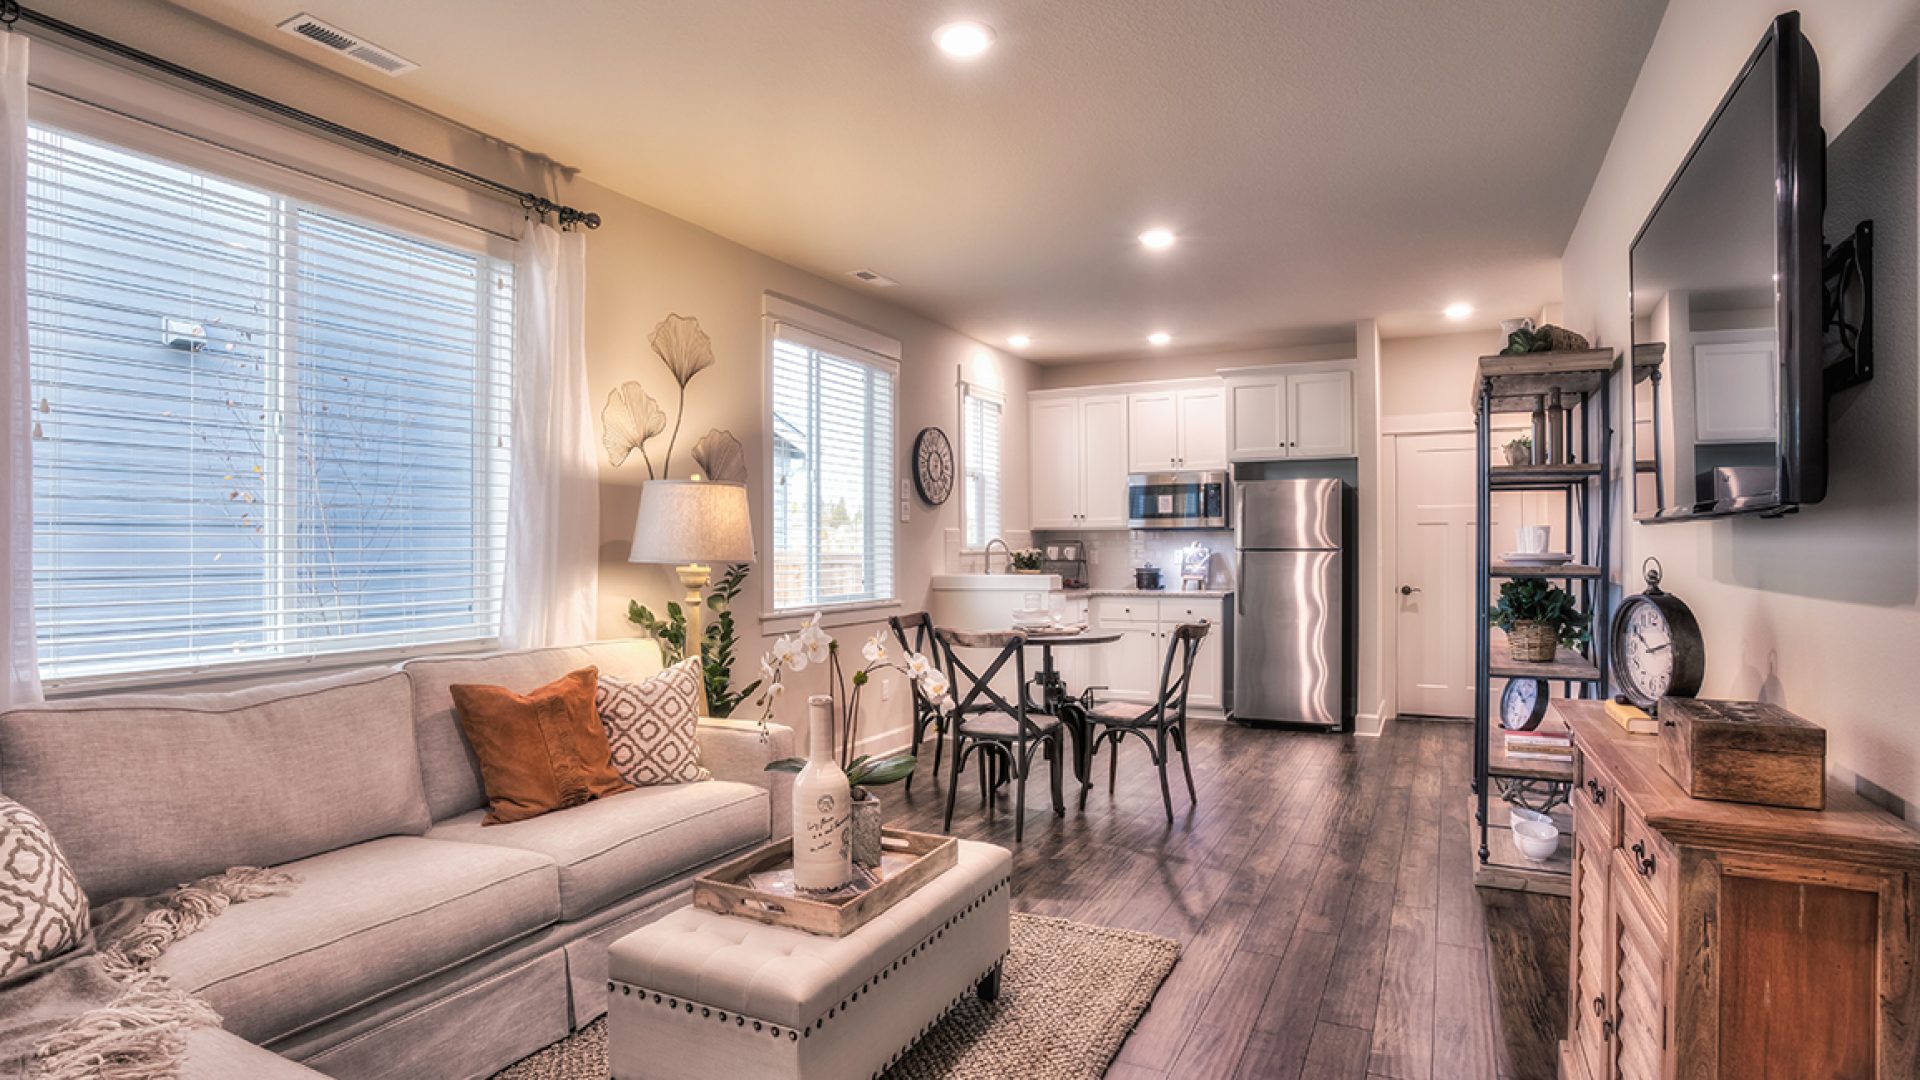 The Home Within a Home® floorplan offers multigenerational living in ...